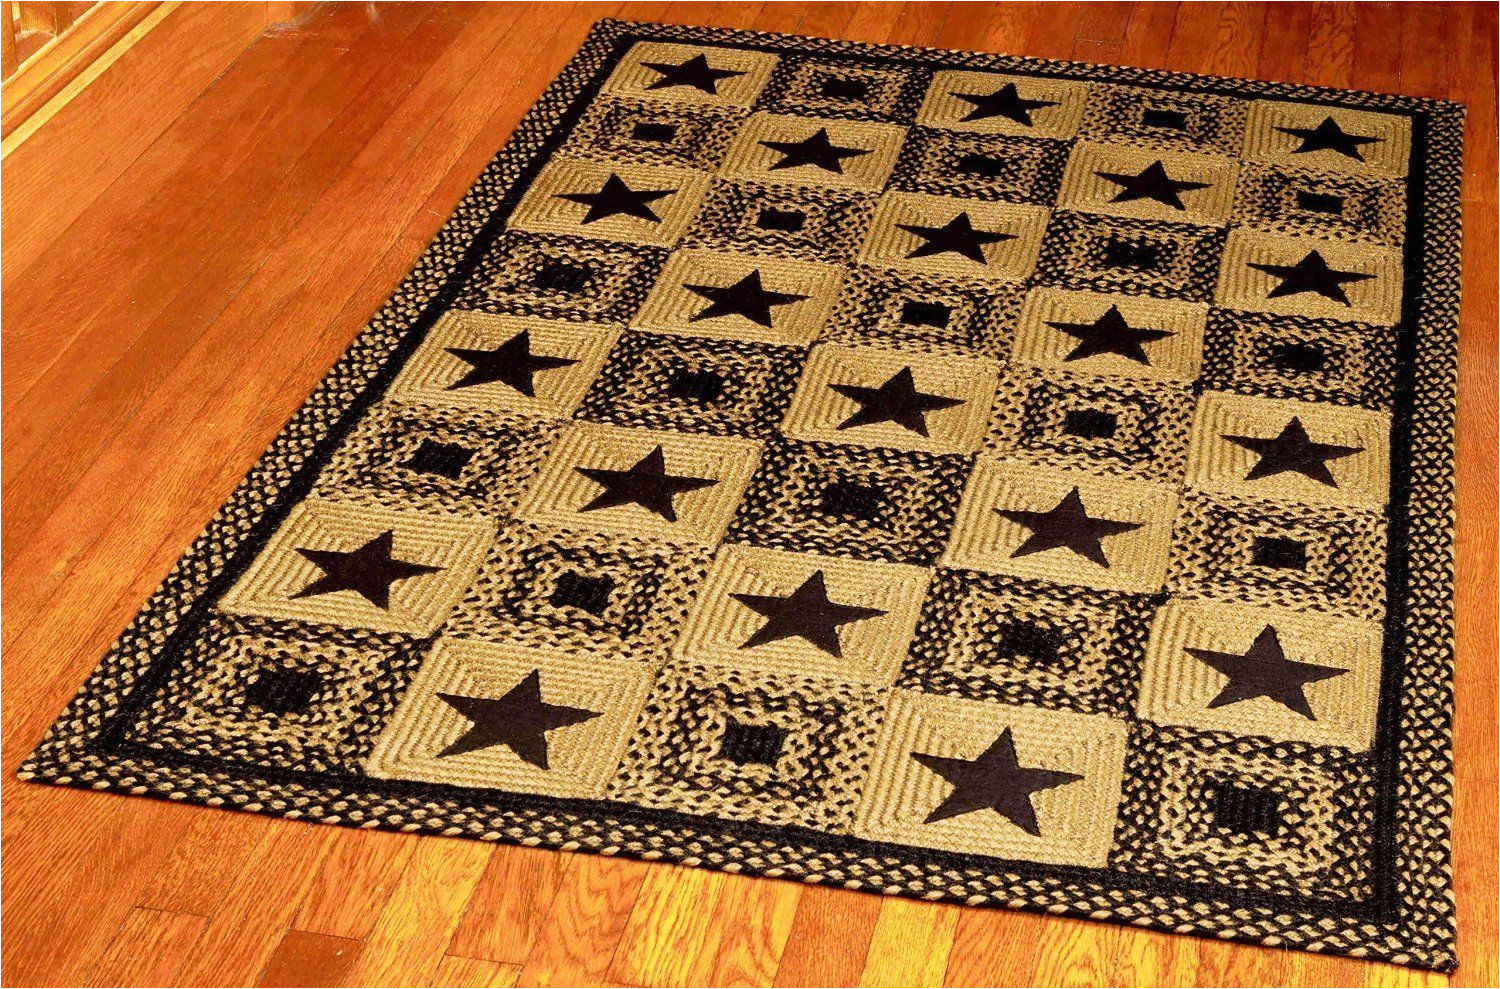 ihf home decor rectangle area accent braided jute rug 5 x 8 country star black design new you can find more details by visiting the image link